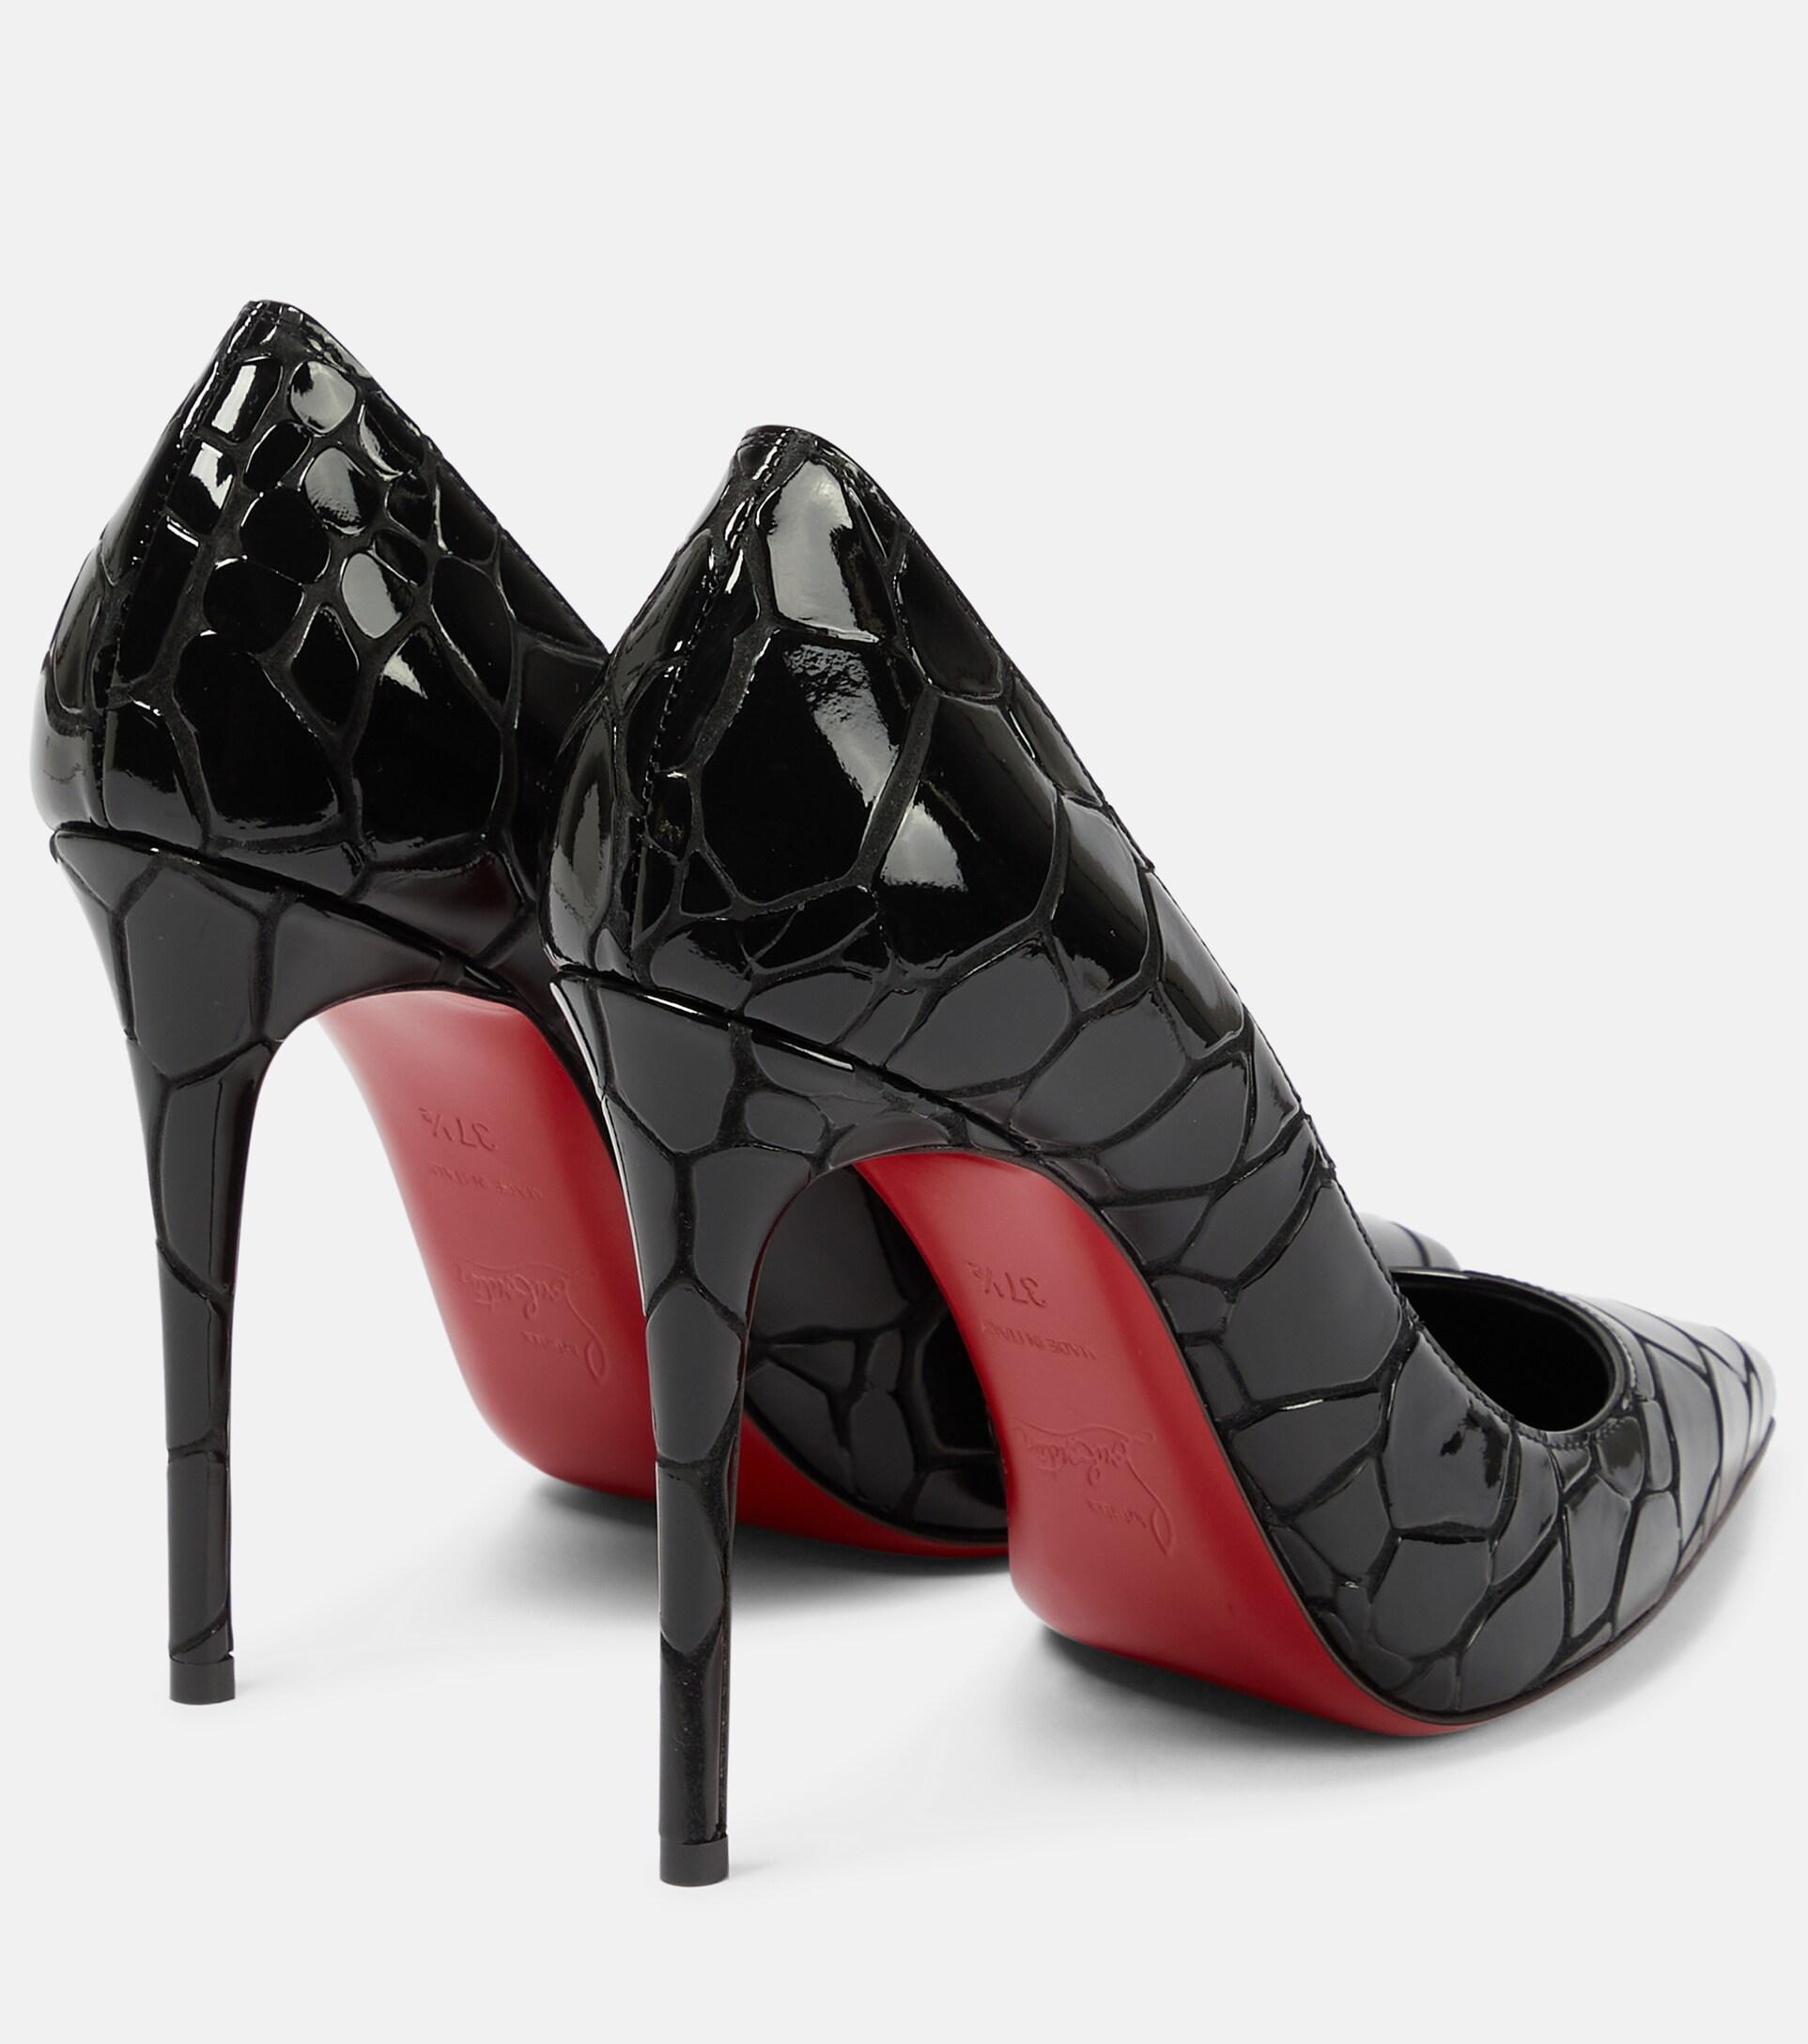 Christian Louboutin Kate 100 Croc-effect Leather Pumps in Black